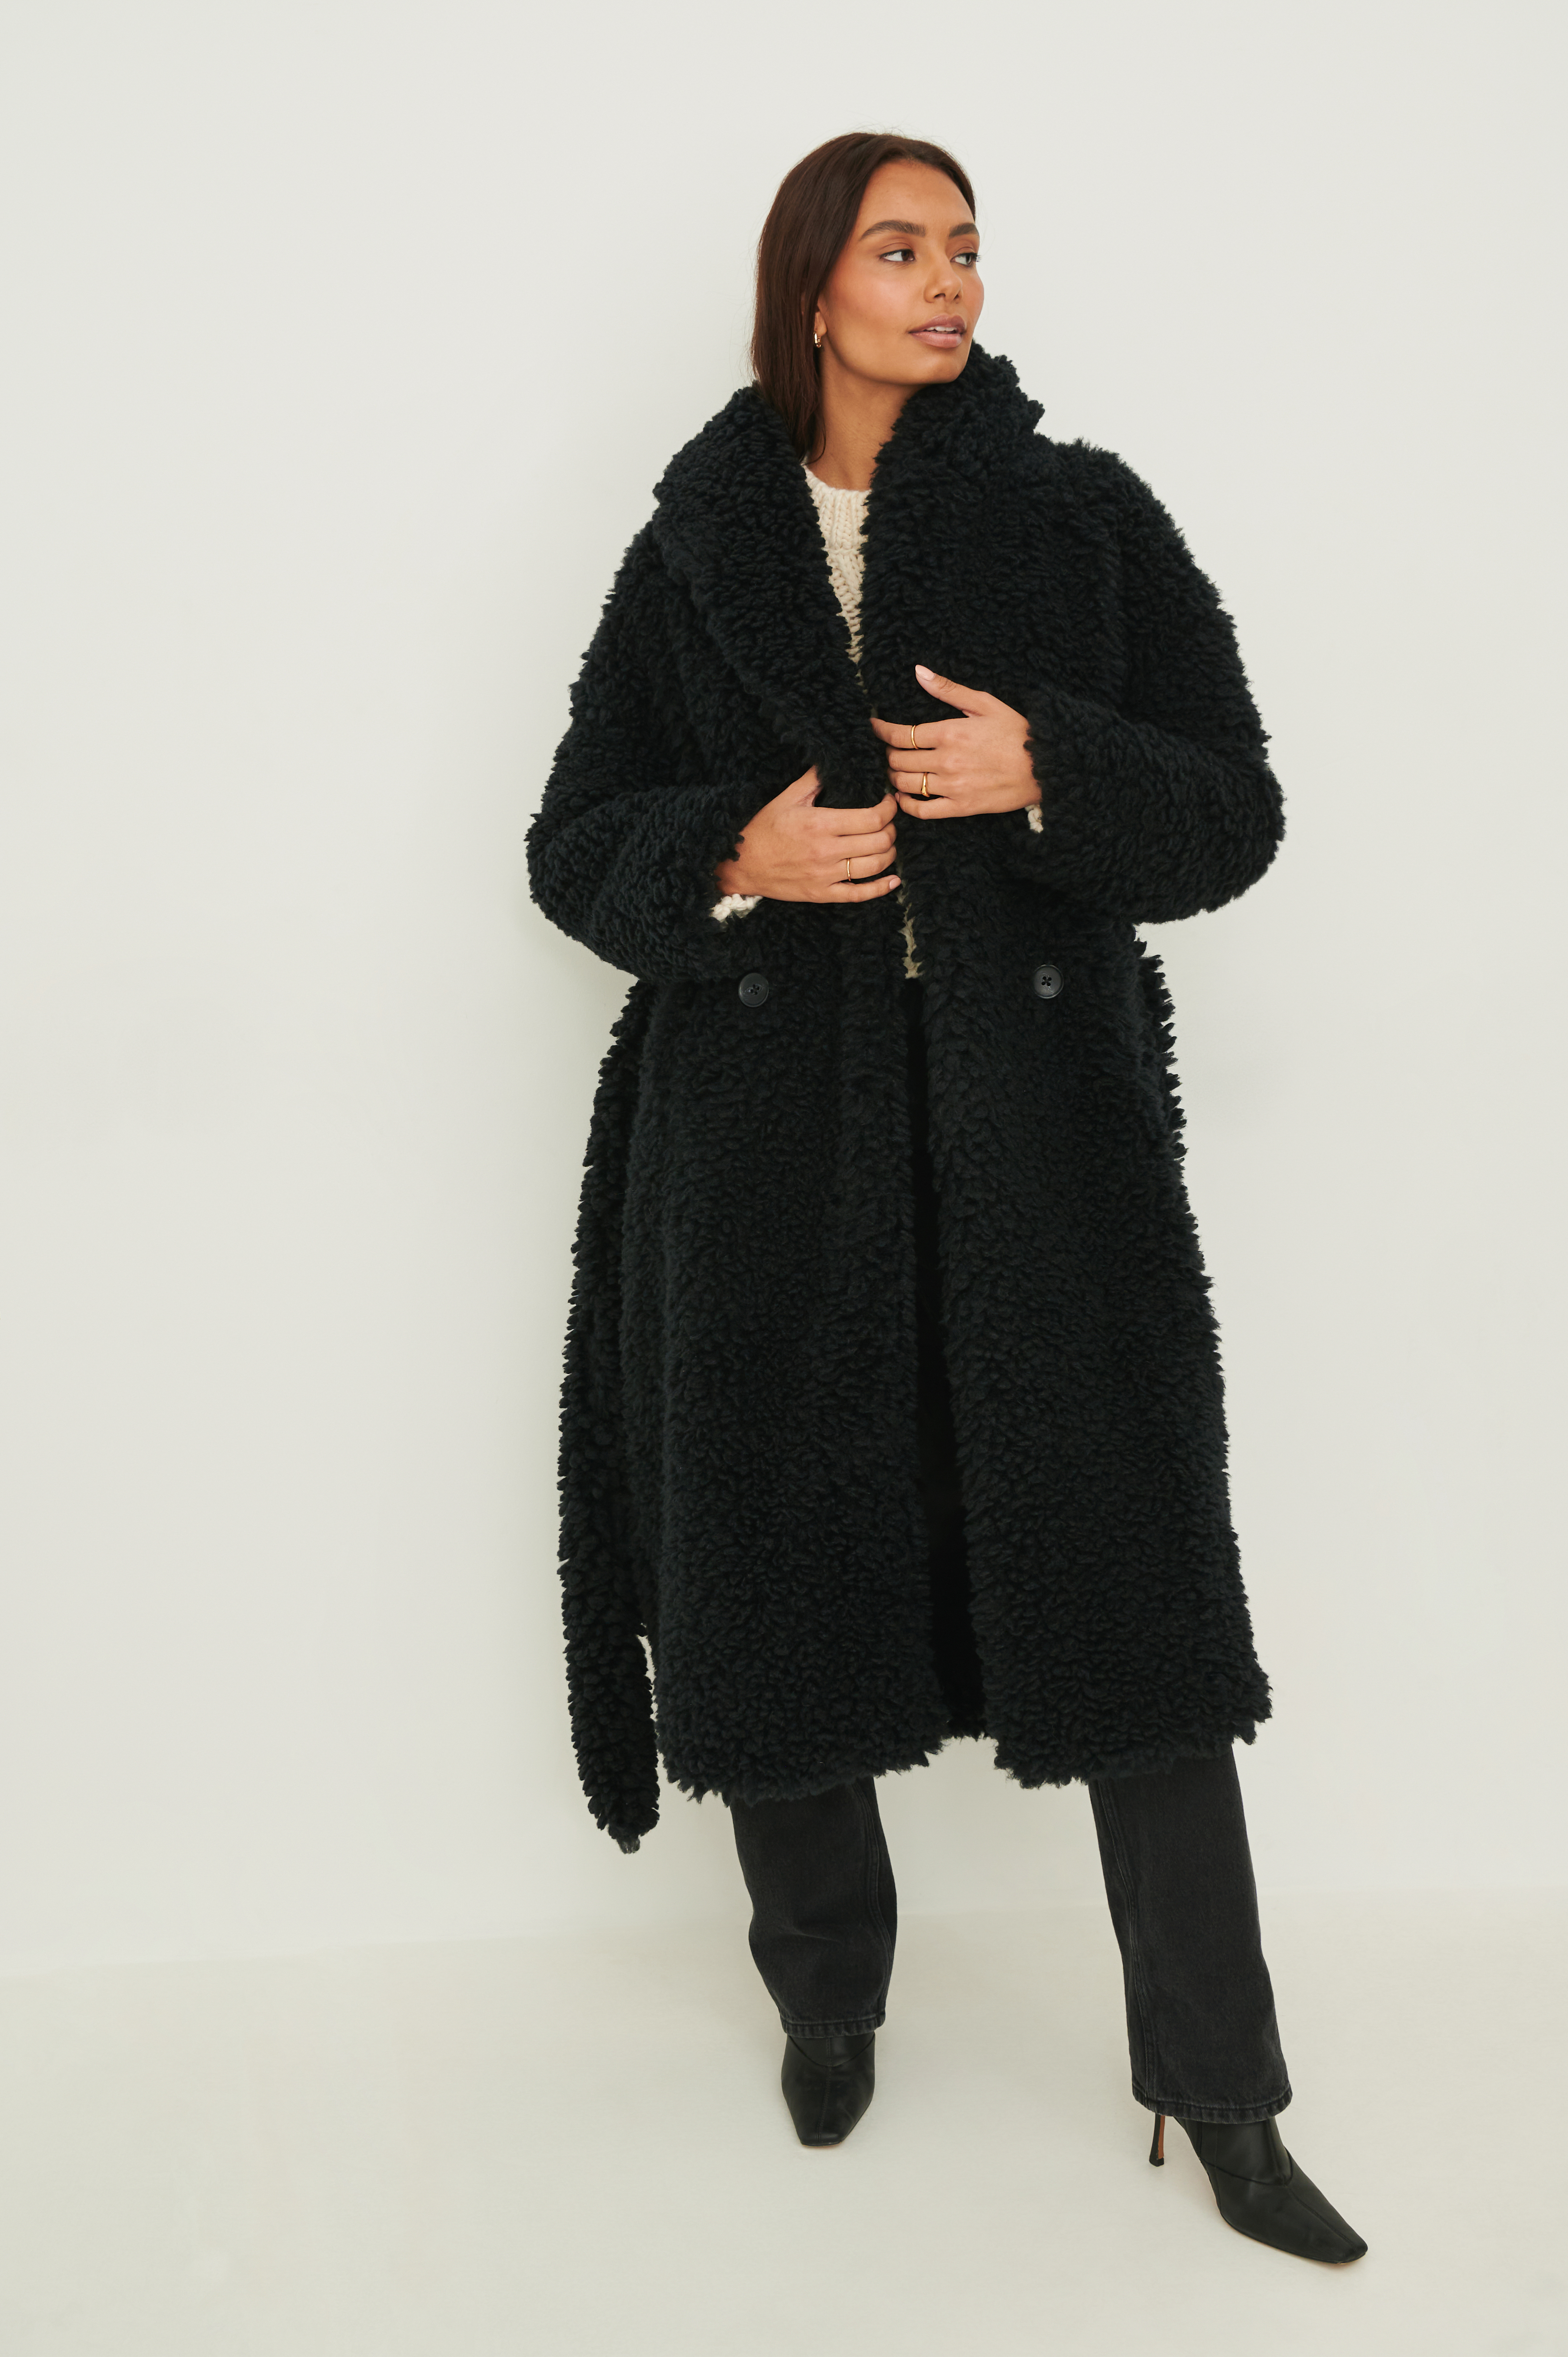 Fluffy Oversized Belted Coat Outfit